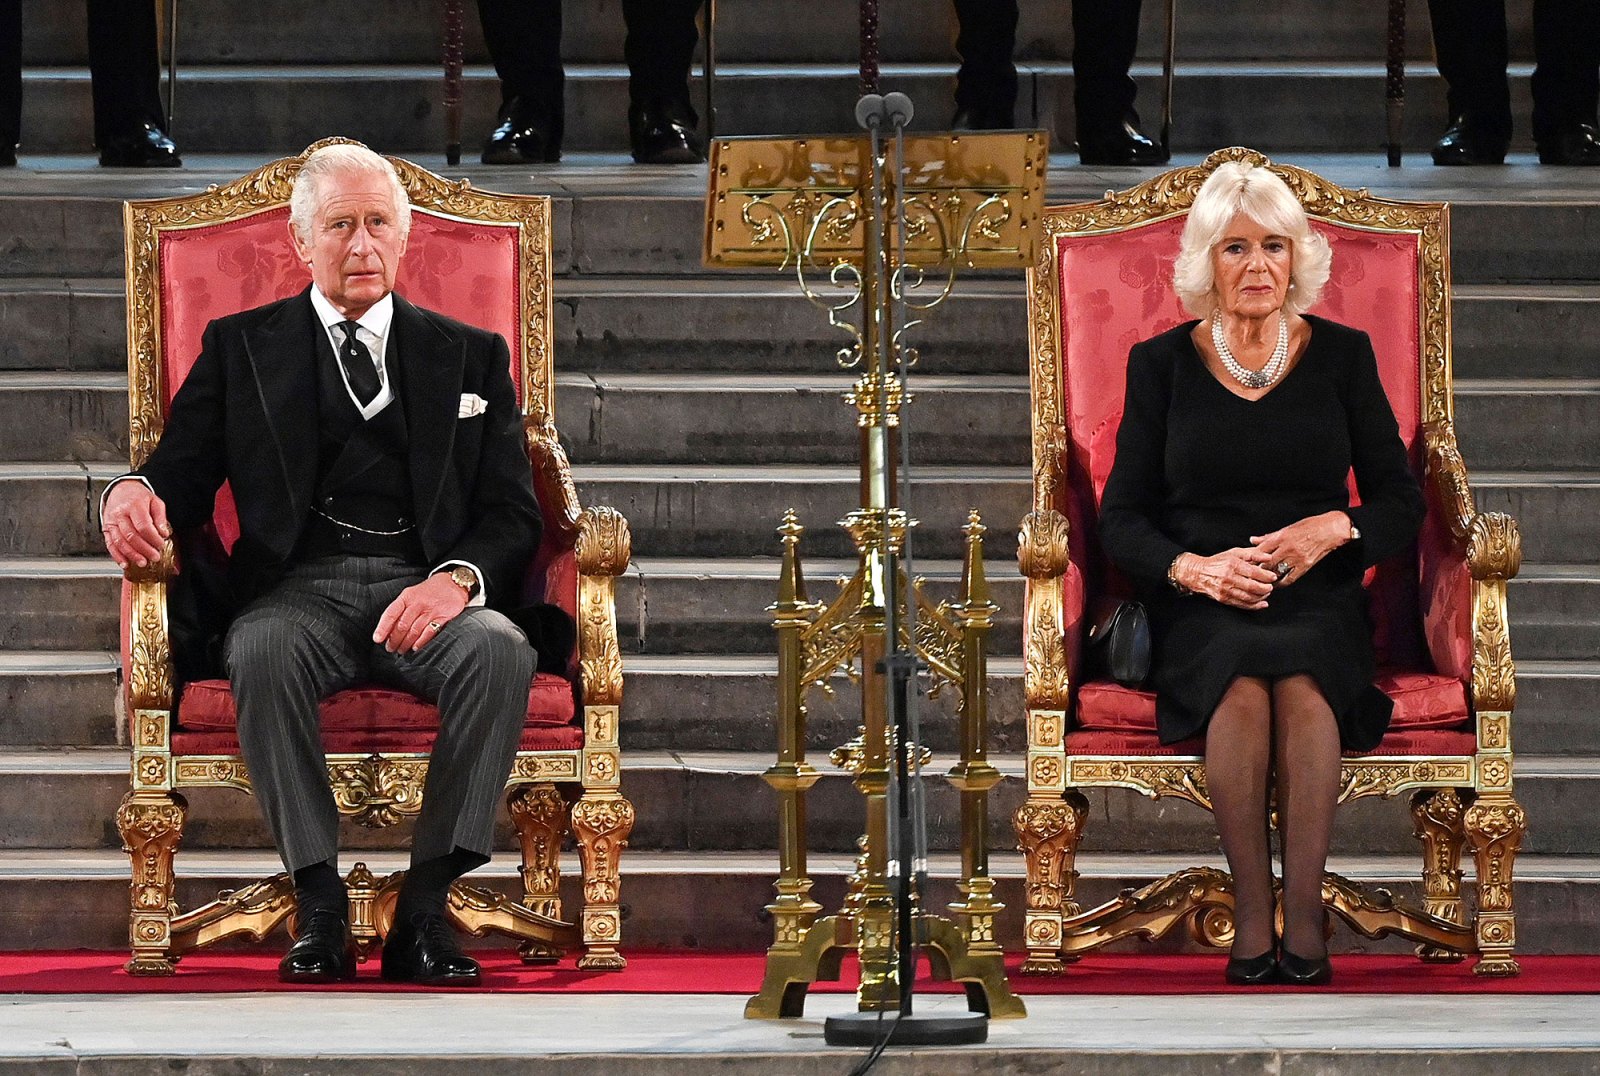 King Charles III and Camilla Queen Consort Sit on the Throne for the 1st Time During Parliament Address 6